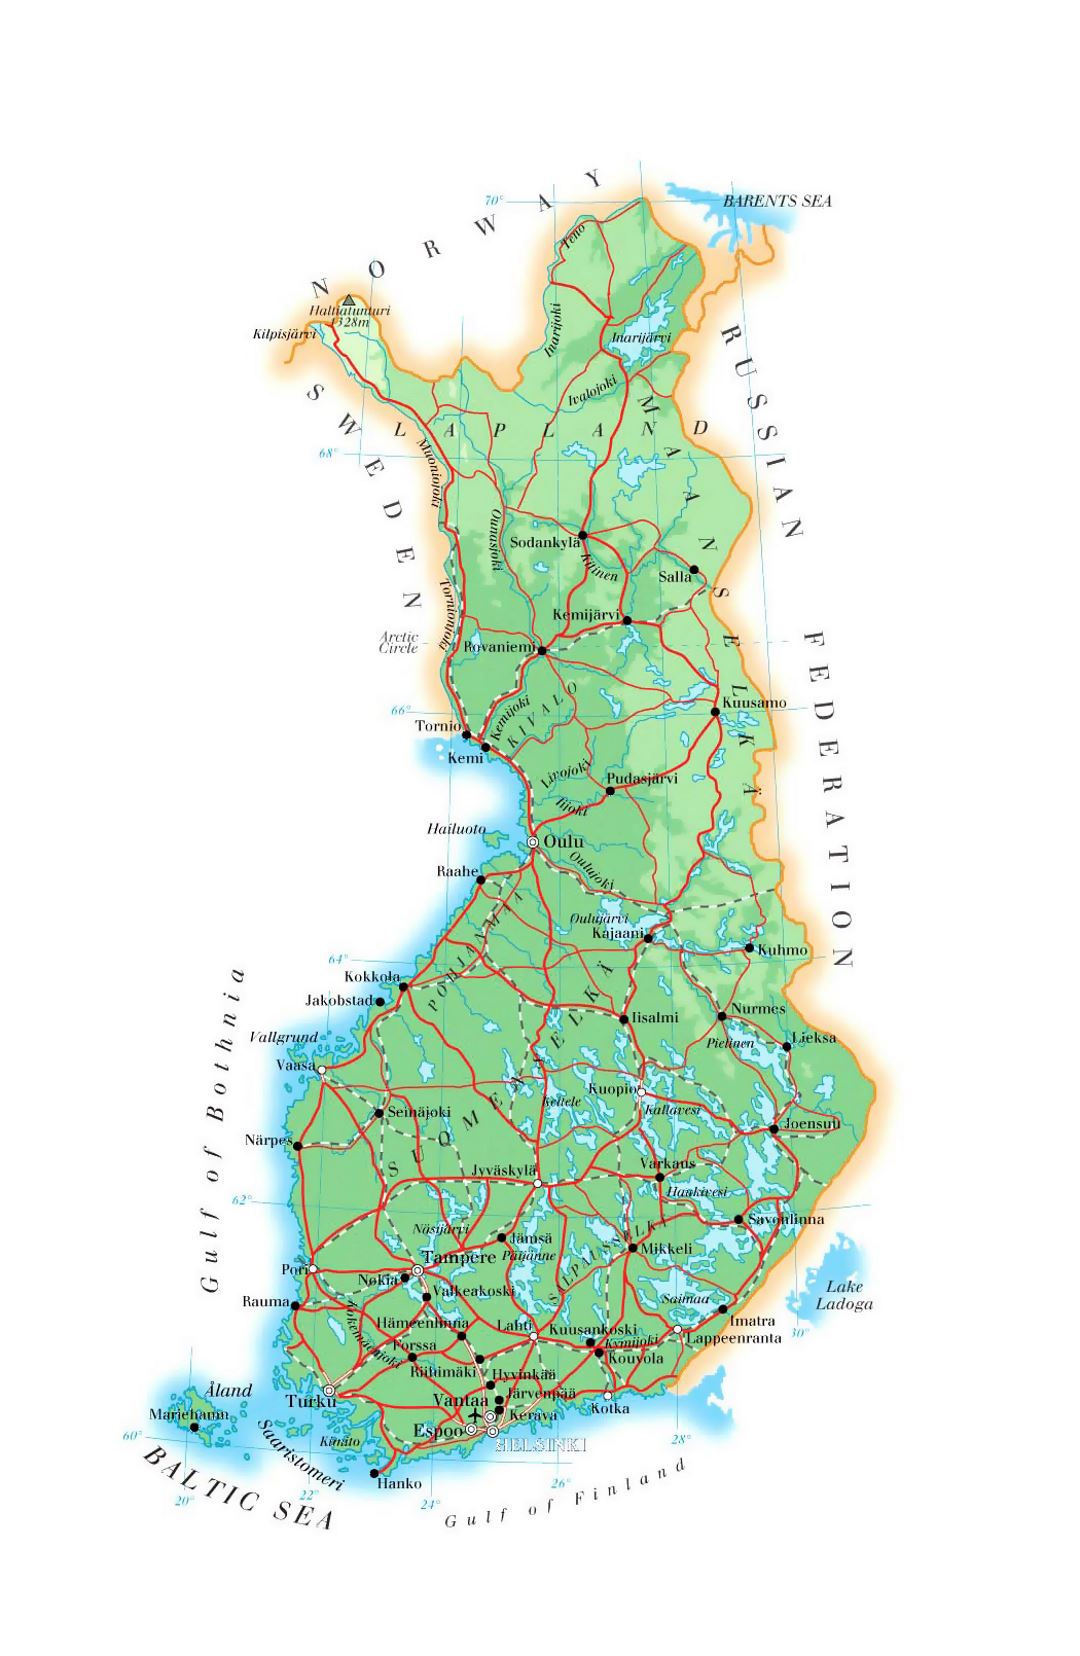 Elevation map of Finland with roads, cities and airports